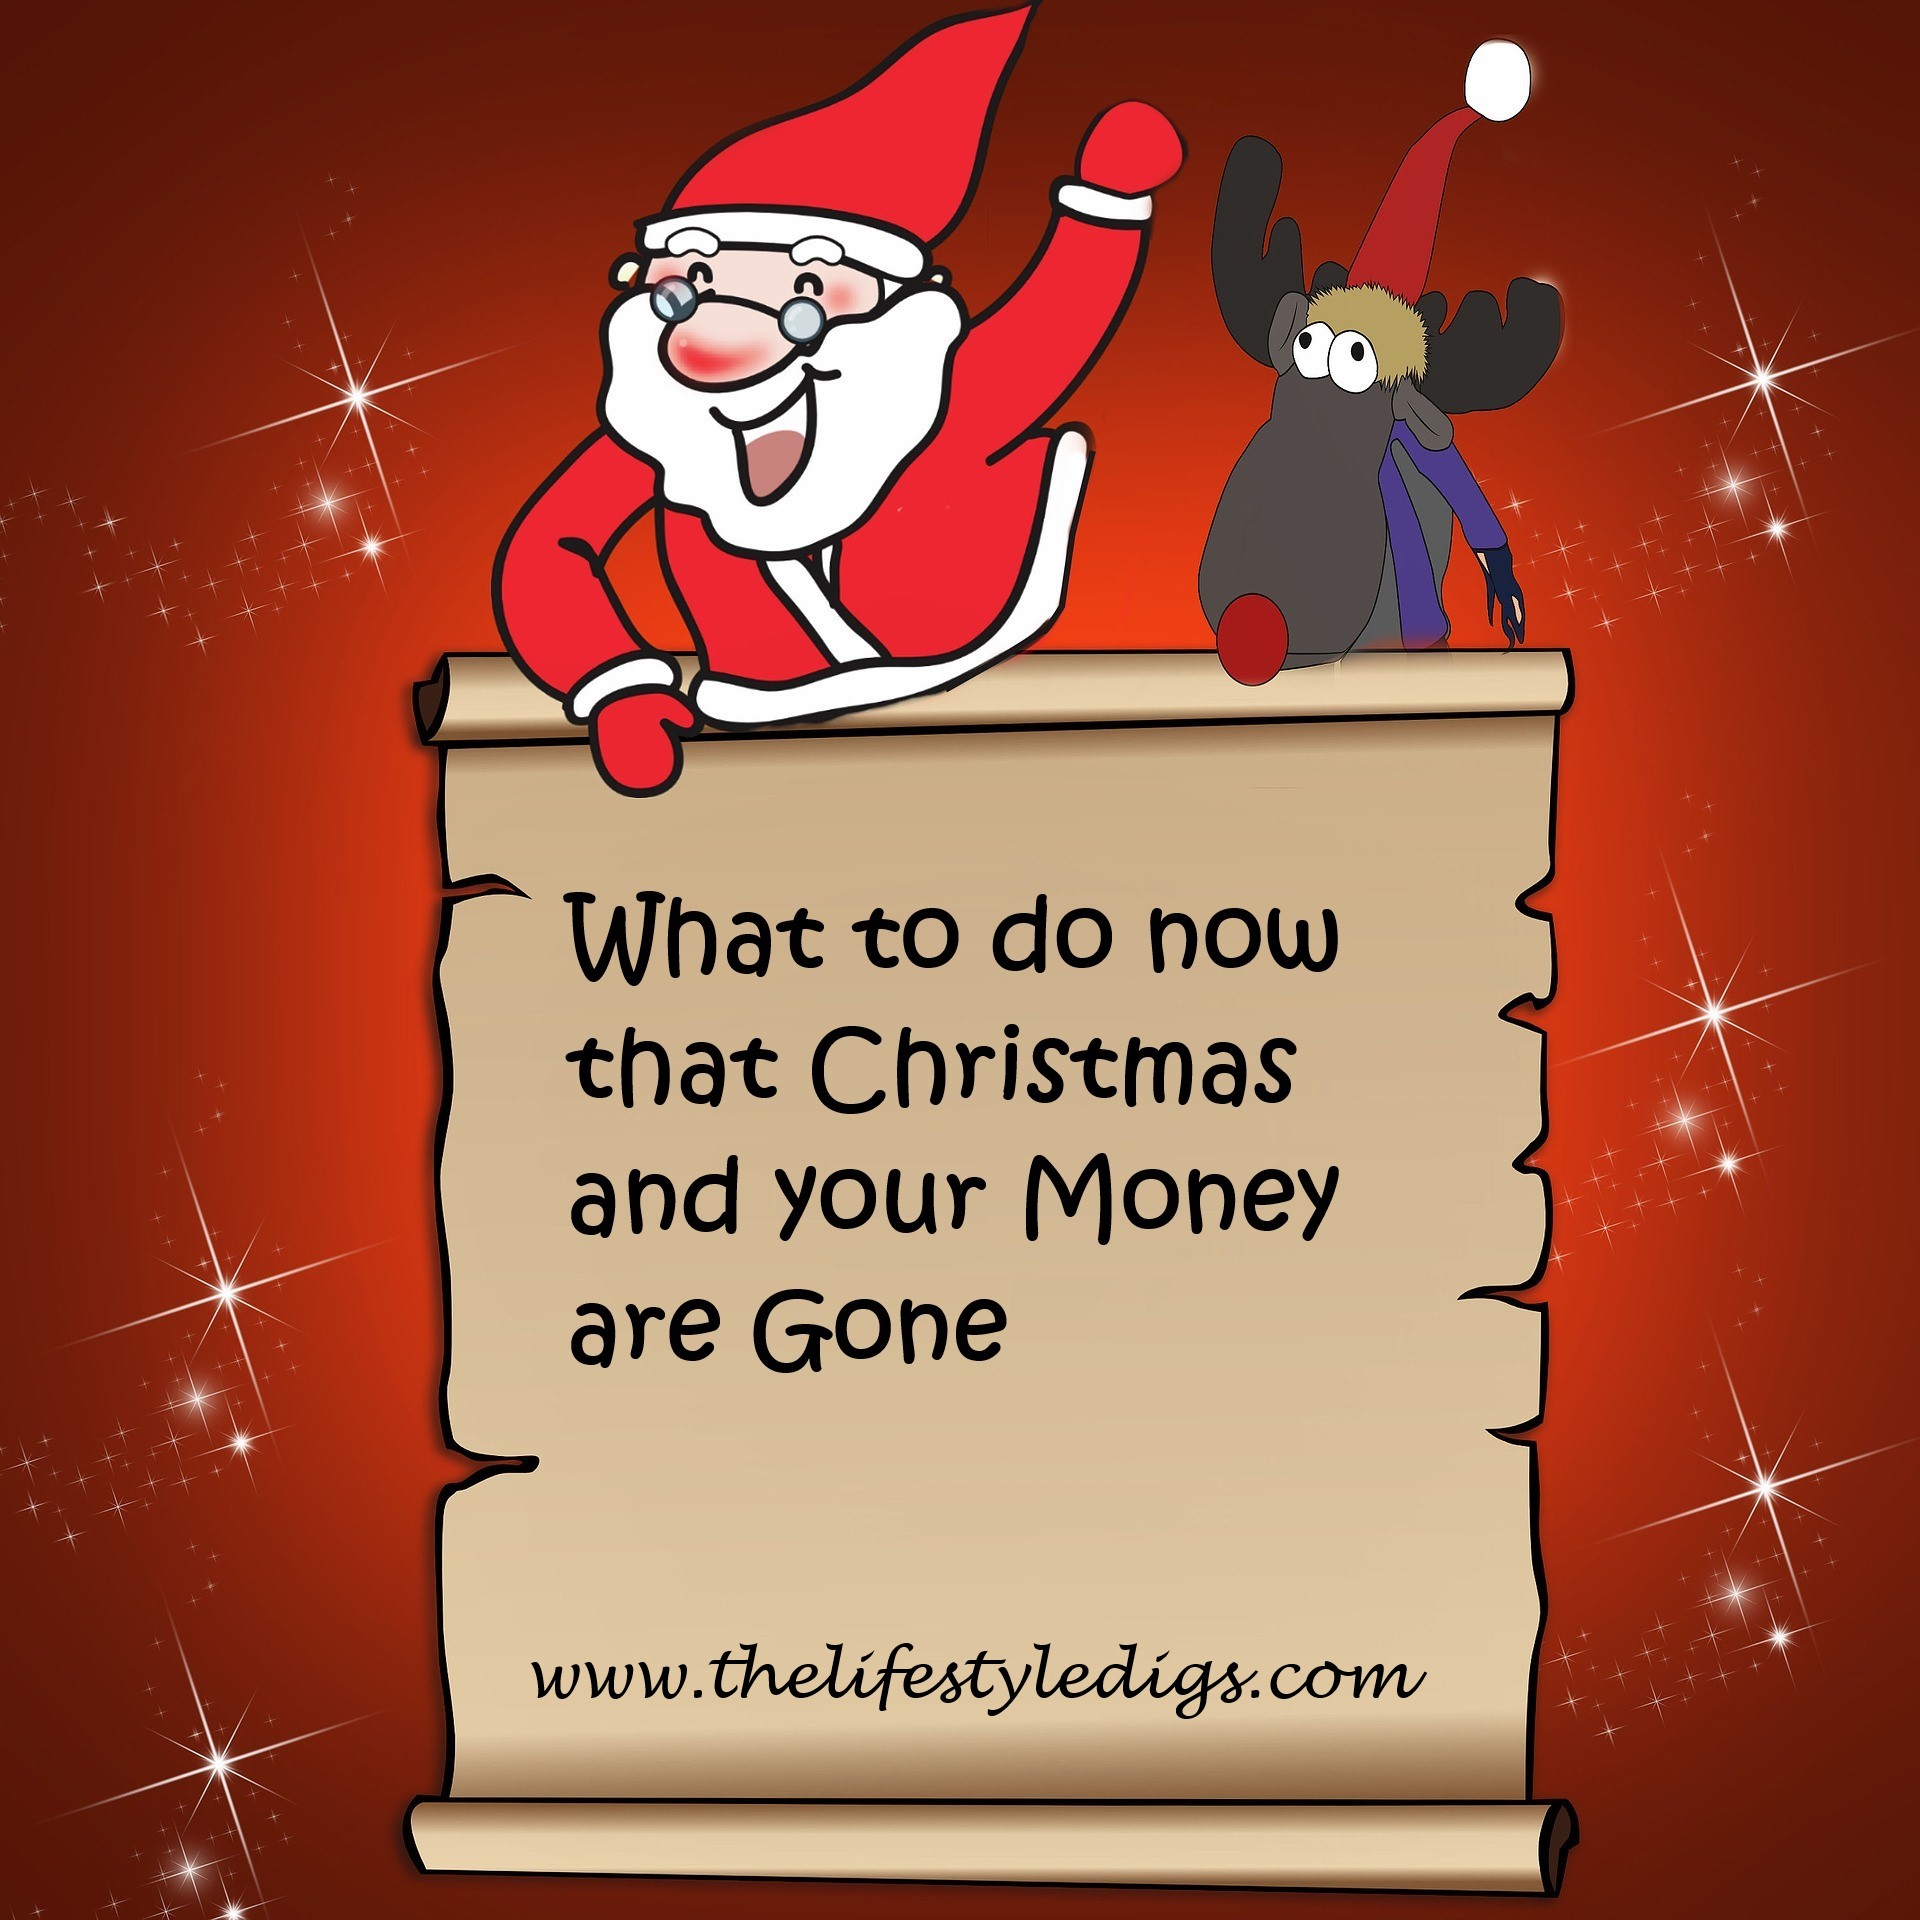 What to do now that Christmas and your Money are Gone